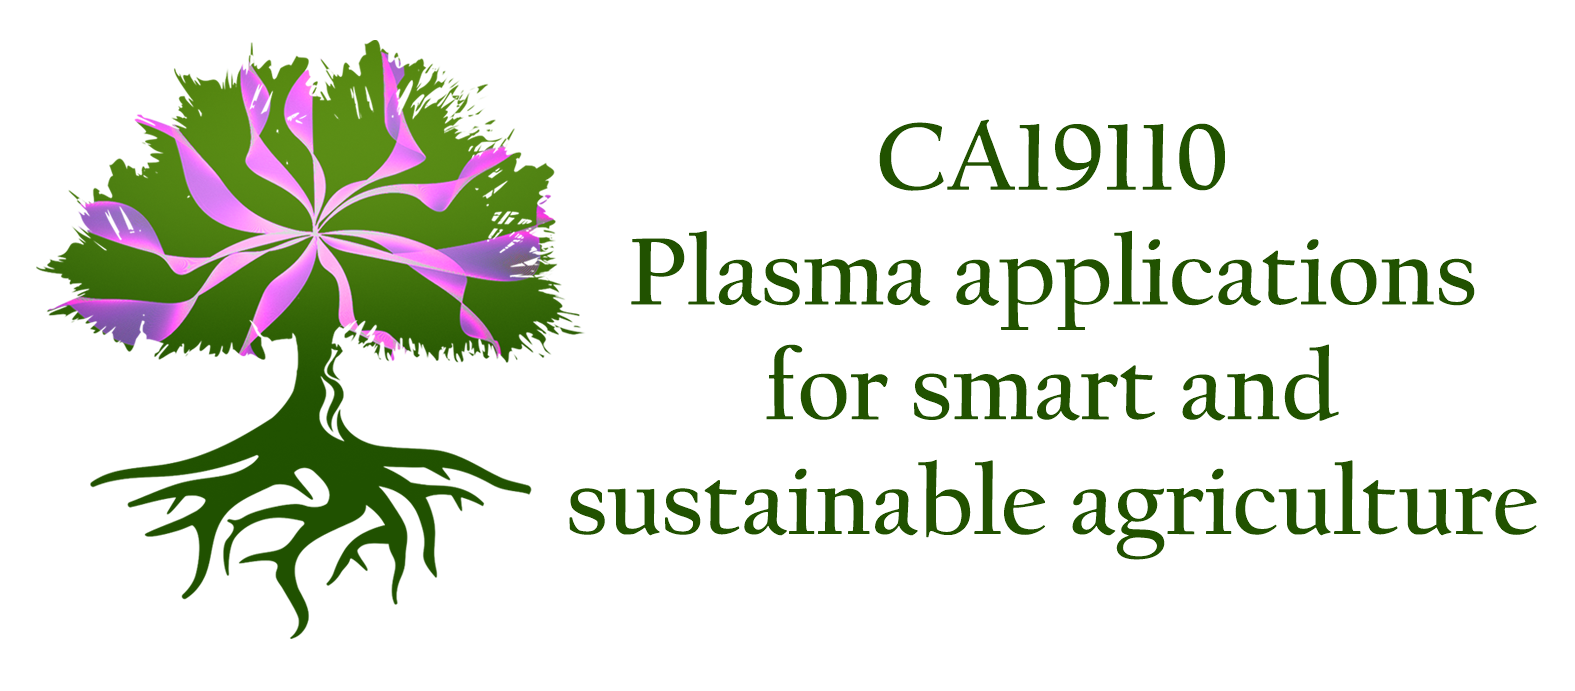 Sustainable agriculture with plasma technology